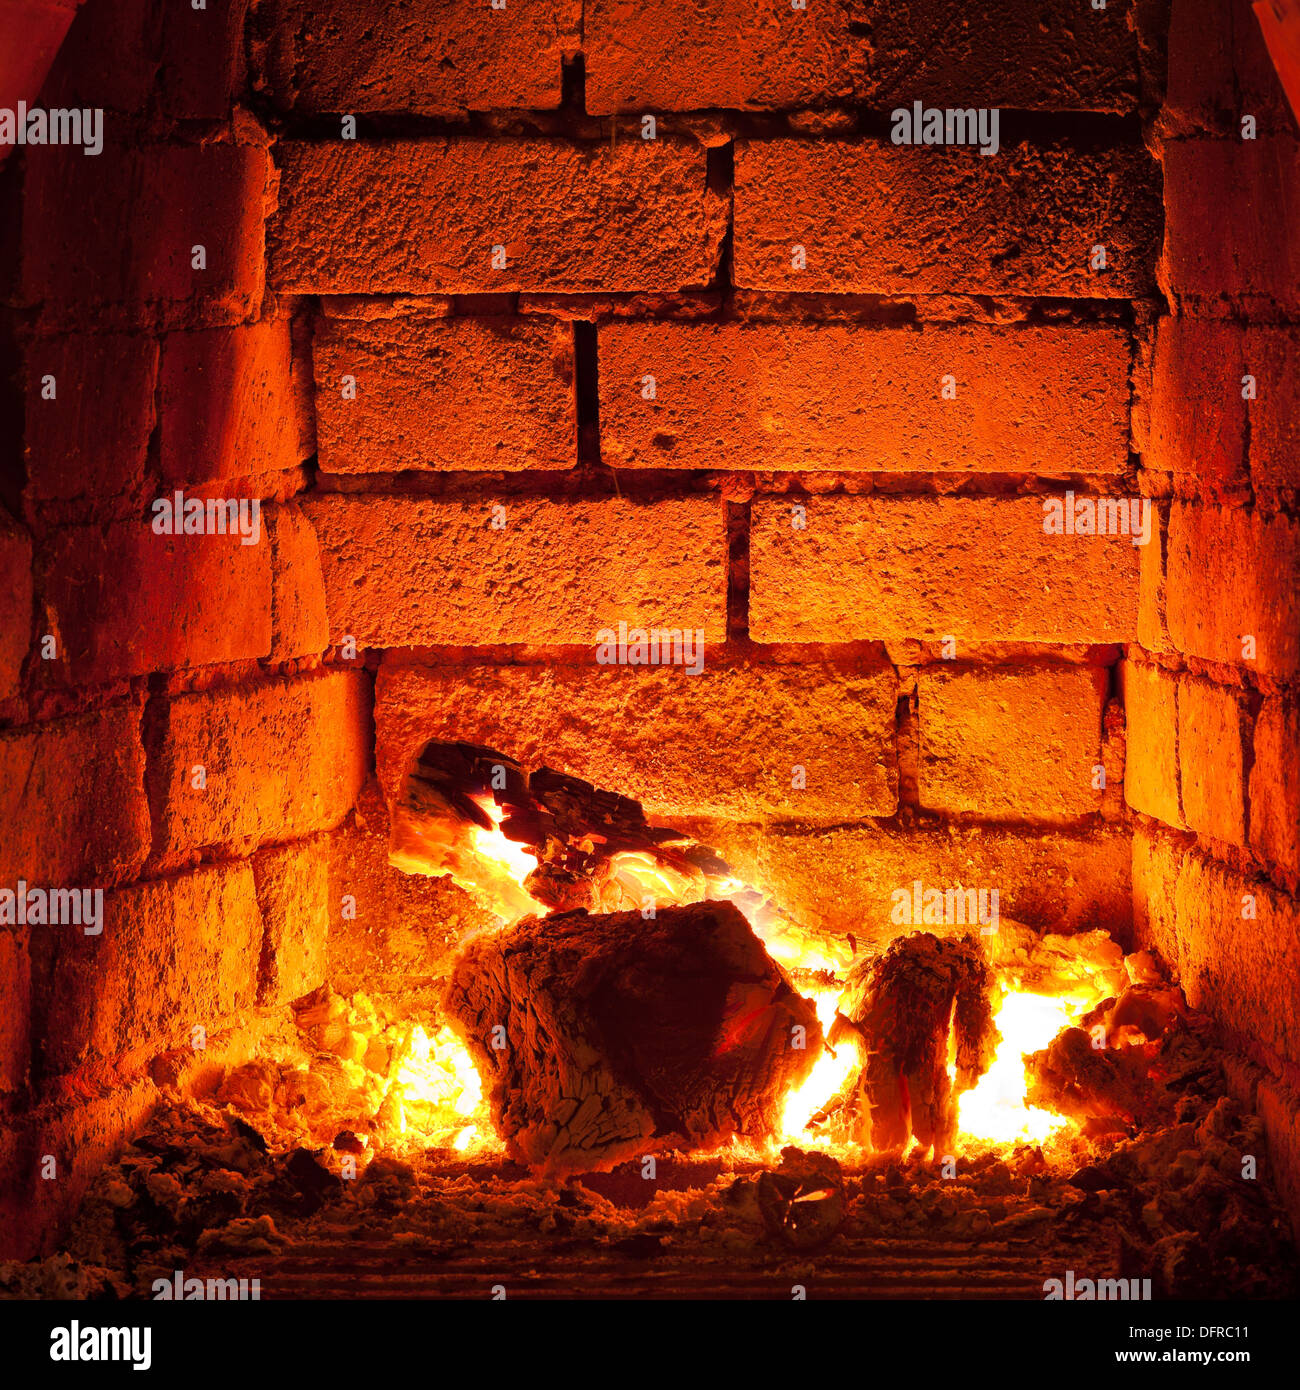 flames of fire in fireplace in evening time Stock Photo